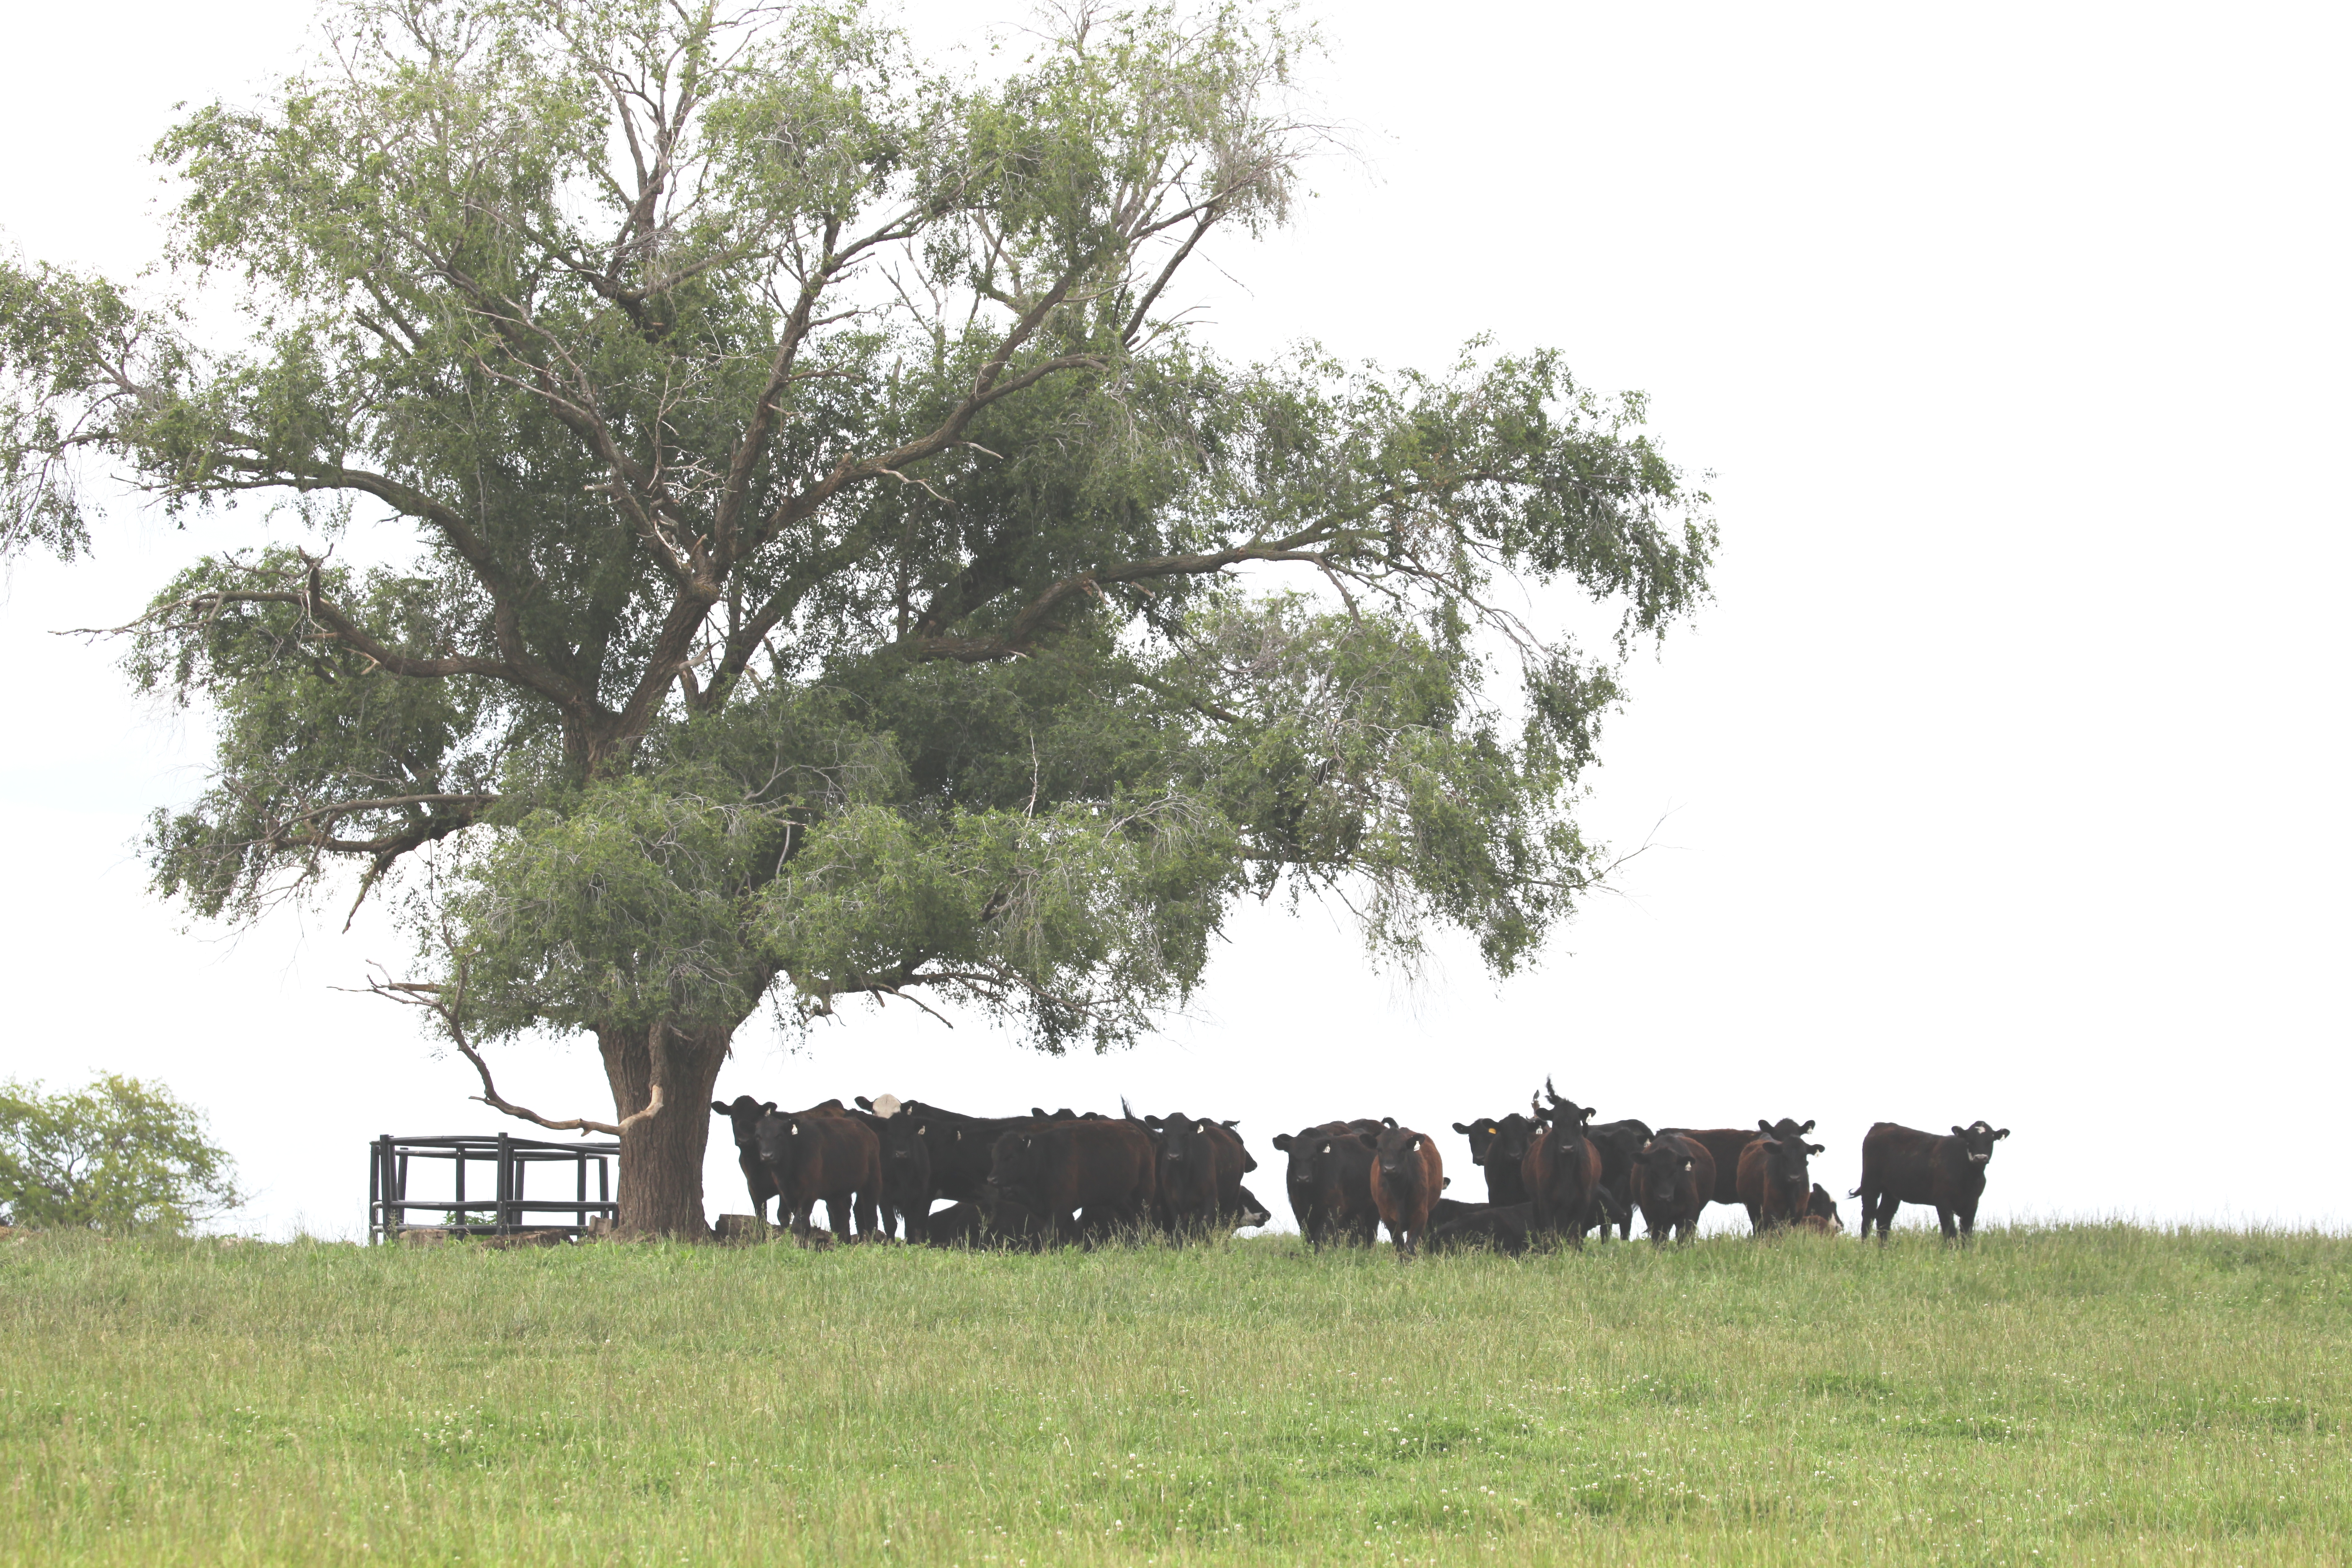 Cattle gathering under shade is a telltale sign of fescue toxicosis